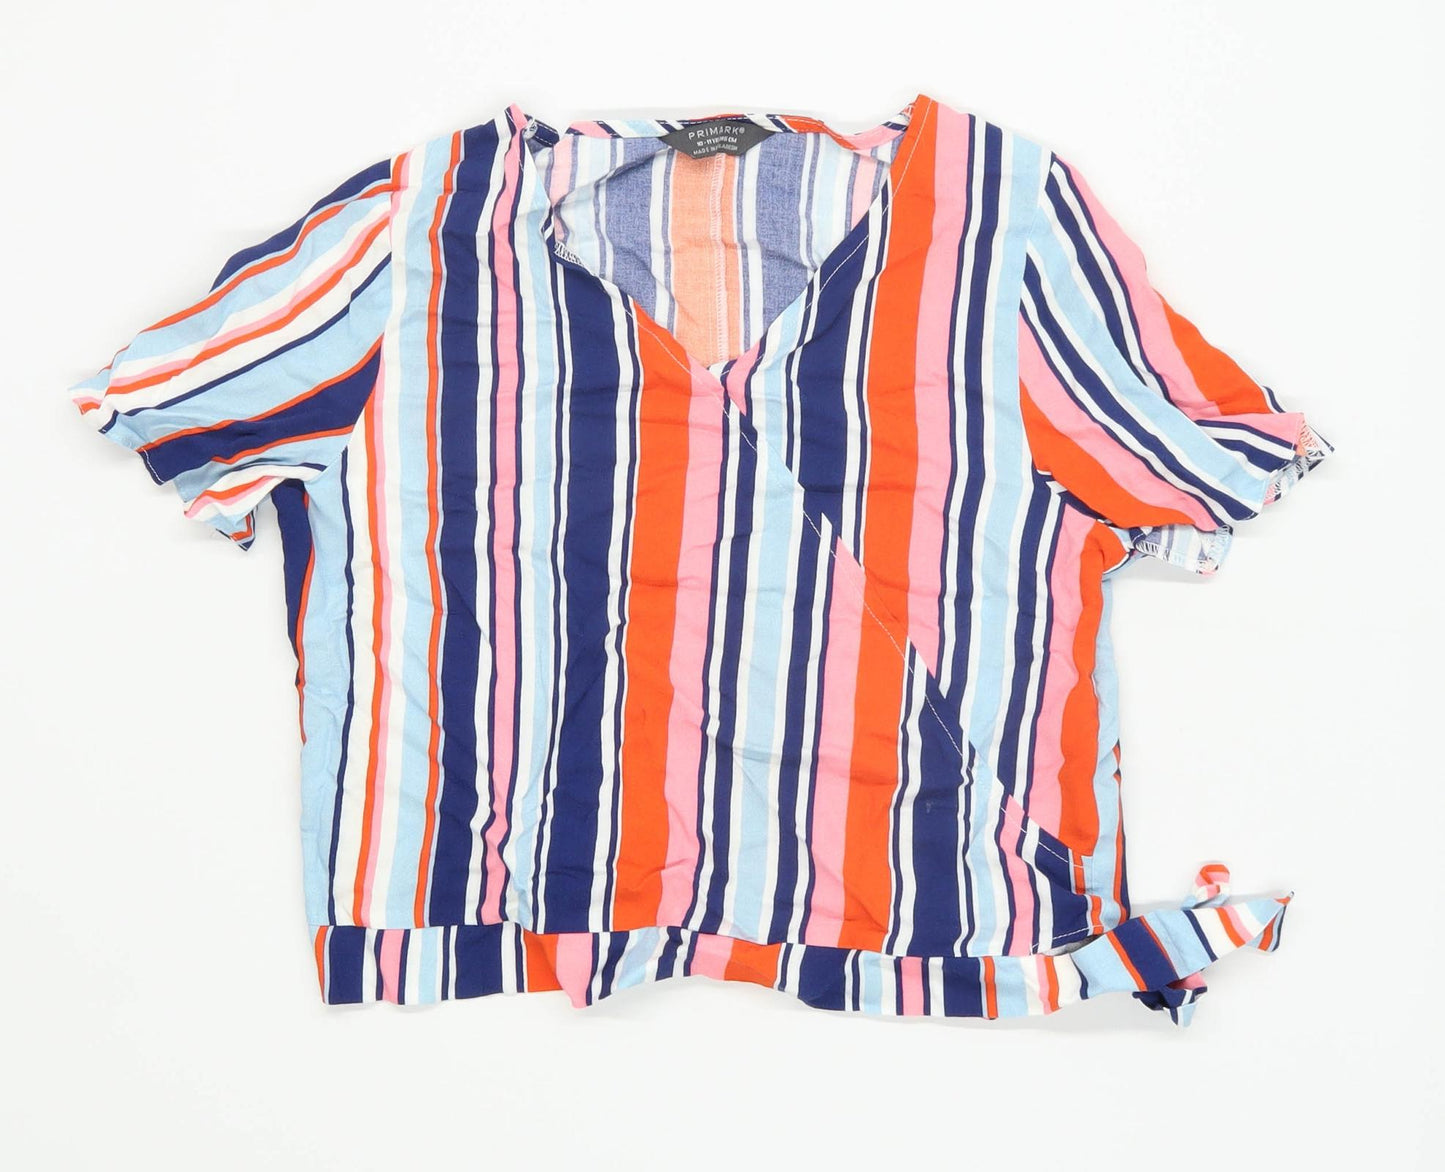 Primark Girls Striped Multi-Coloured Top Age 10-11 Years